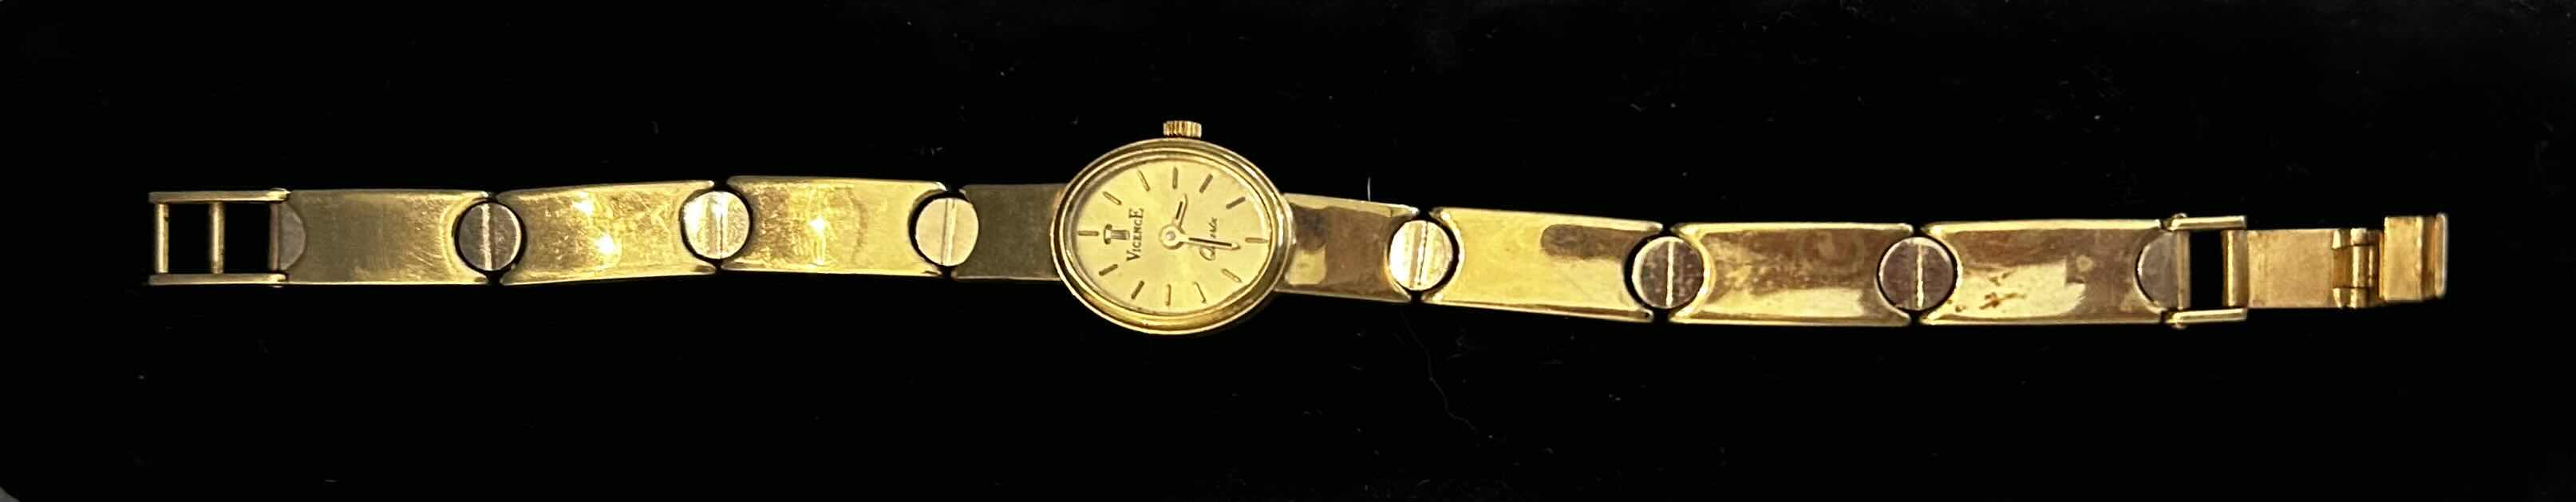 Photo 2 of SOLID 14K GOLD MADE IN ITALY QUARTZ WATCH WITH SOLID 14K BRACELET WATCH BAND